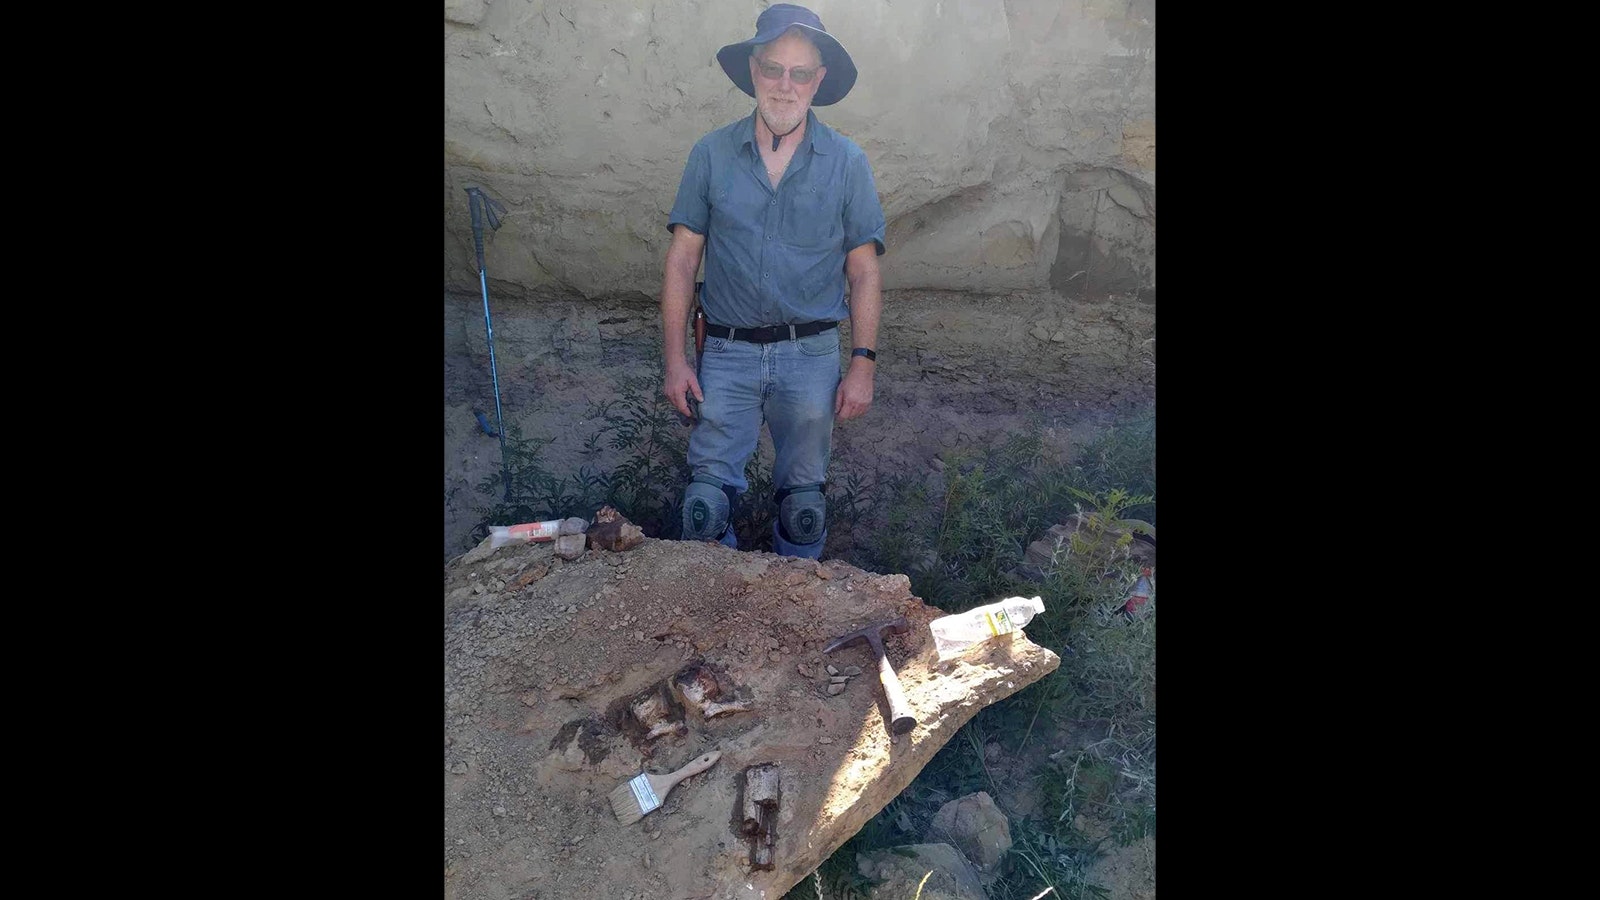 A man named Kevin was participating in a Paleo Prospector field session when he encountered this sandstone block containing several connected tail bones. There's hope that the rest of an articulated skeleton is in the rock wall where the block fell out.